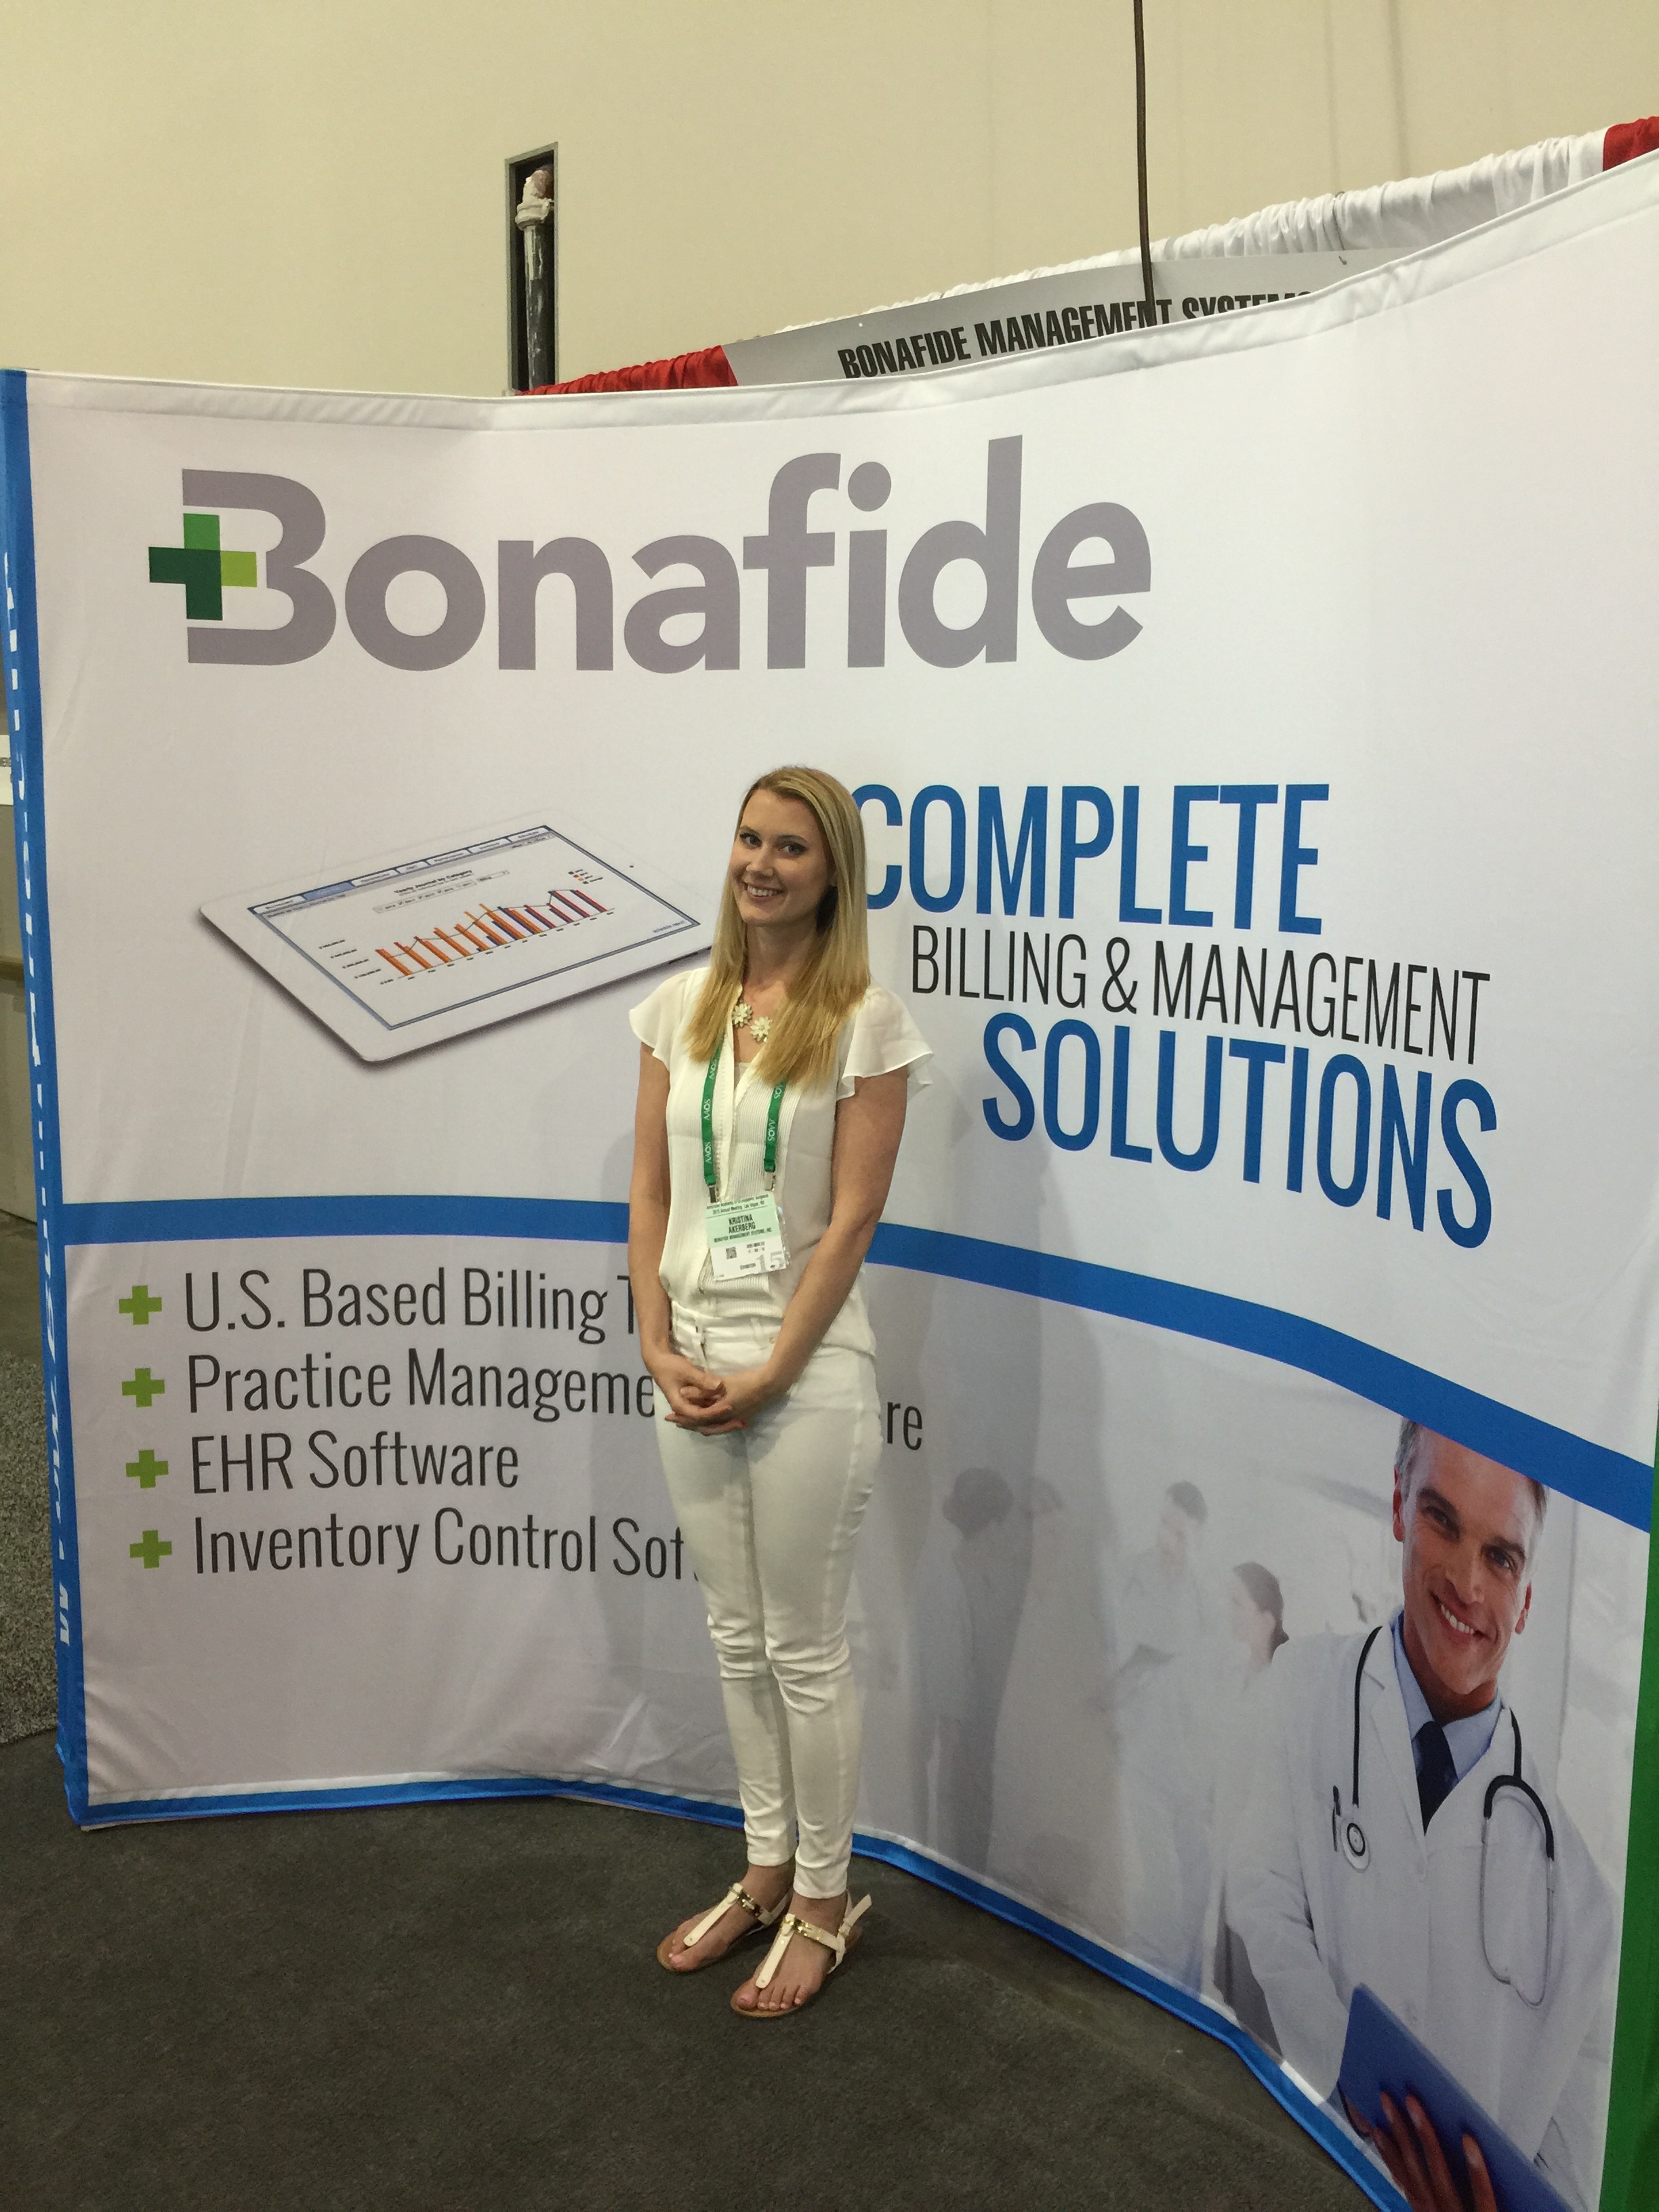 Bonafide Management Systems at AAOS 2015